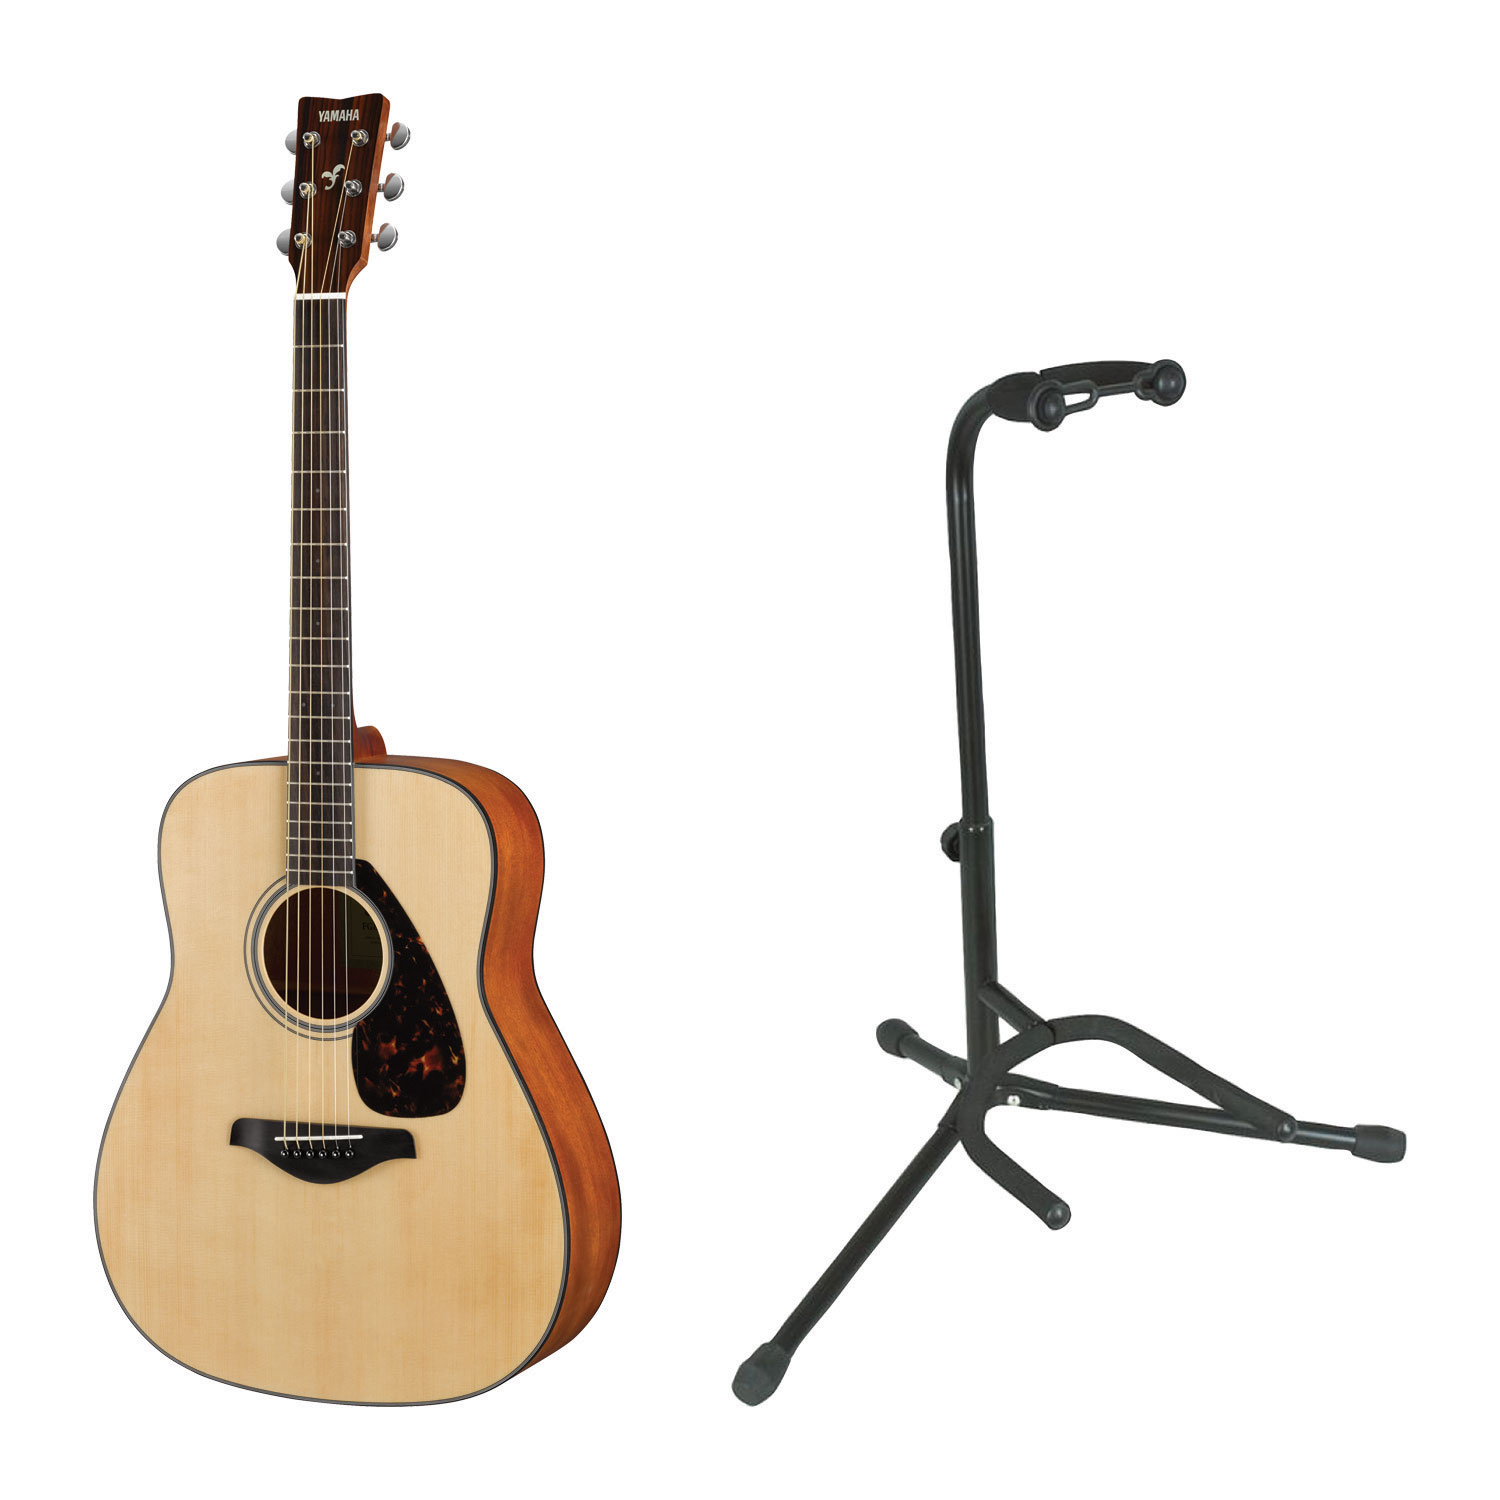 Yamaha FG800 Acoustic Guitar with Stand - Matte Natural